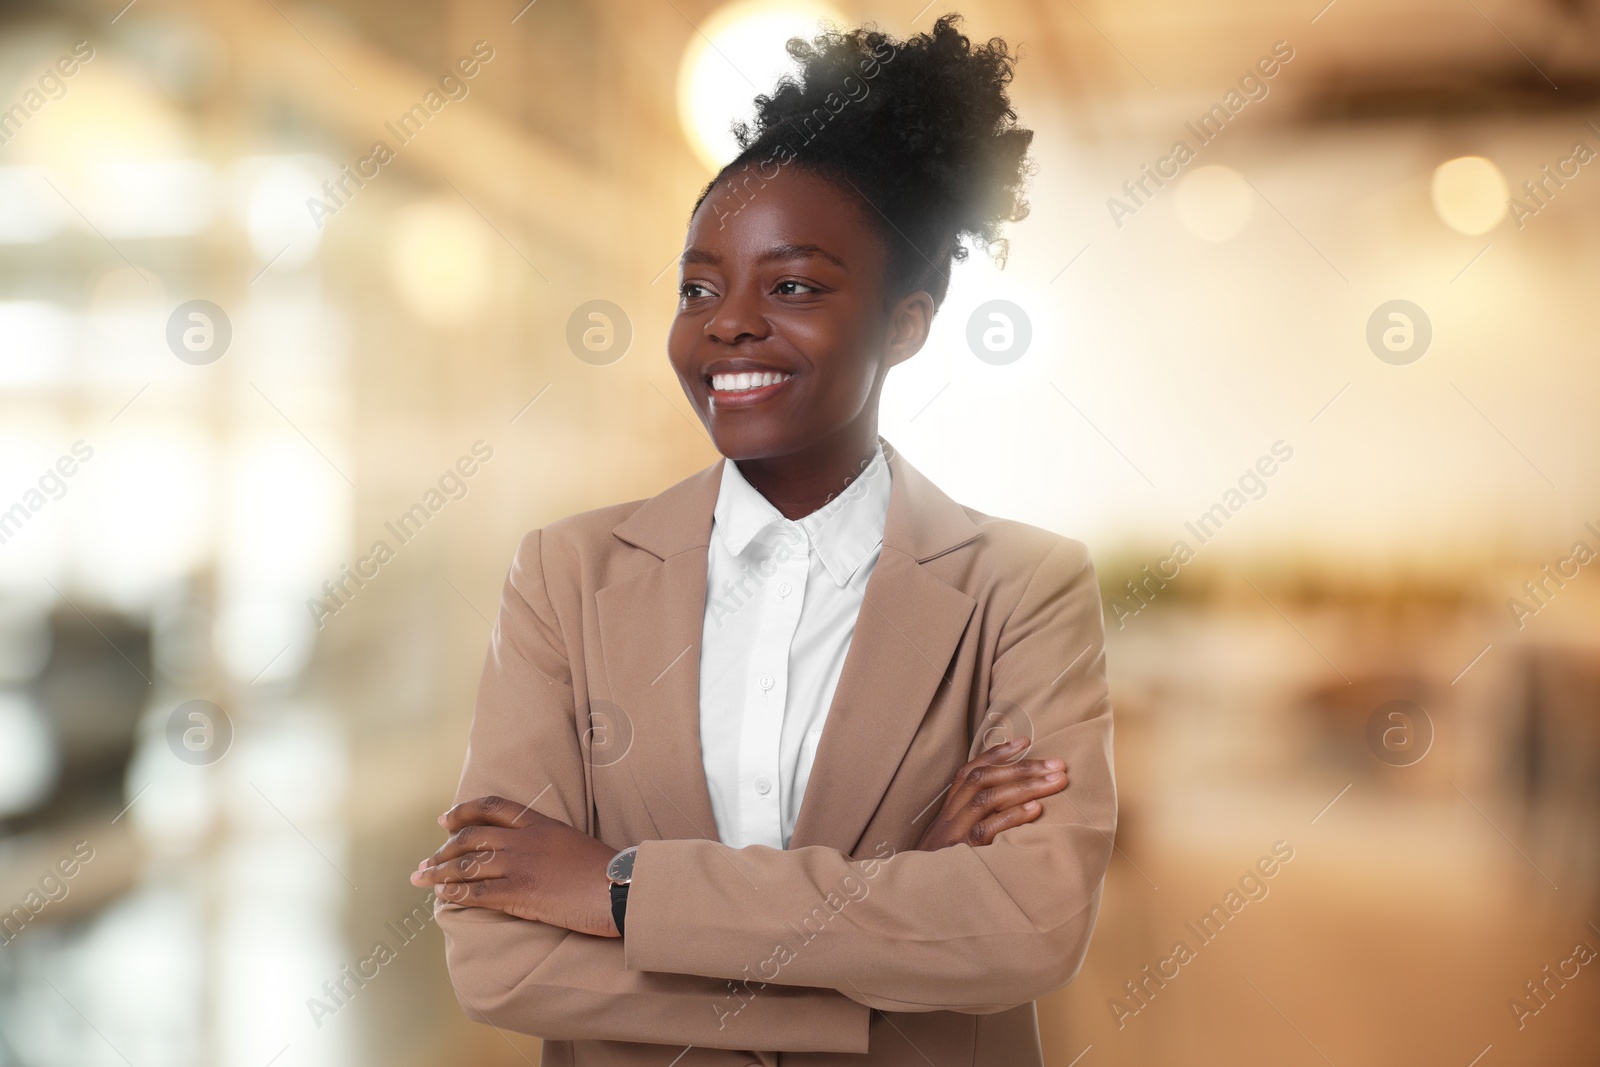 Image of Lawyer, consultant, business owner. Confident woman smiling indoors